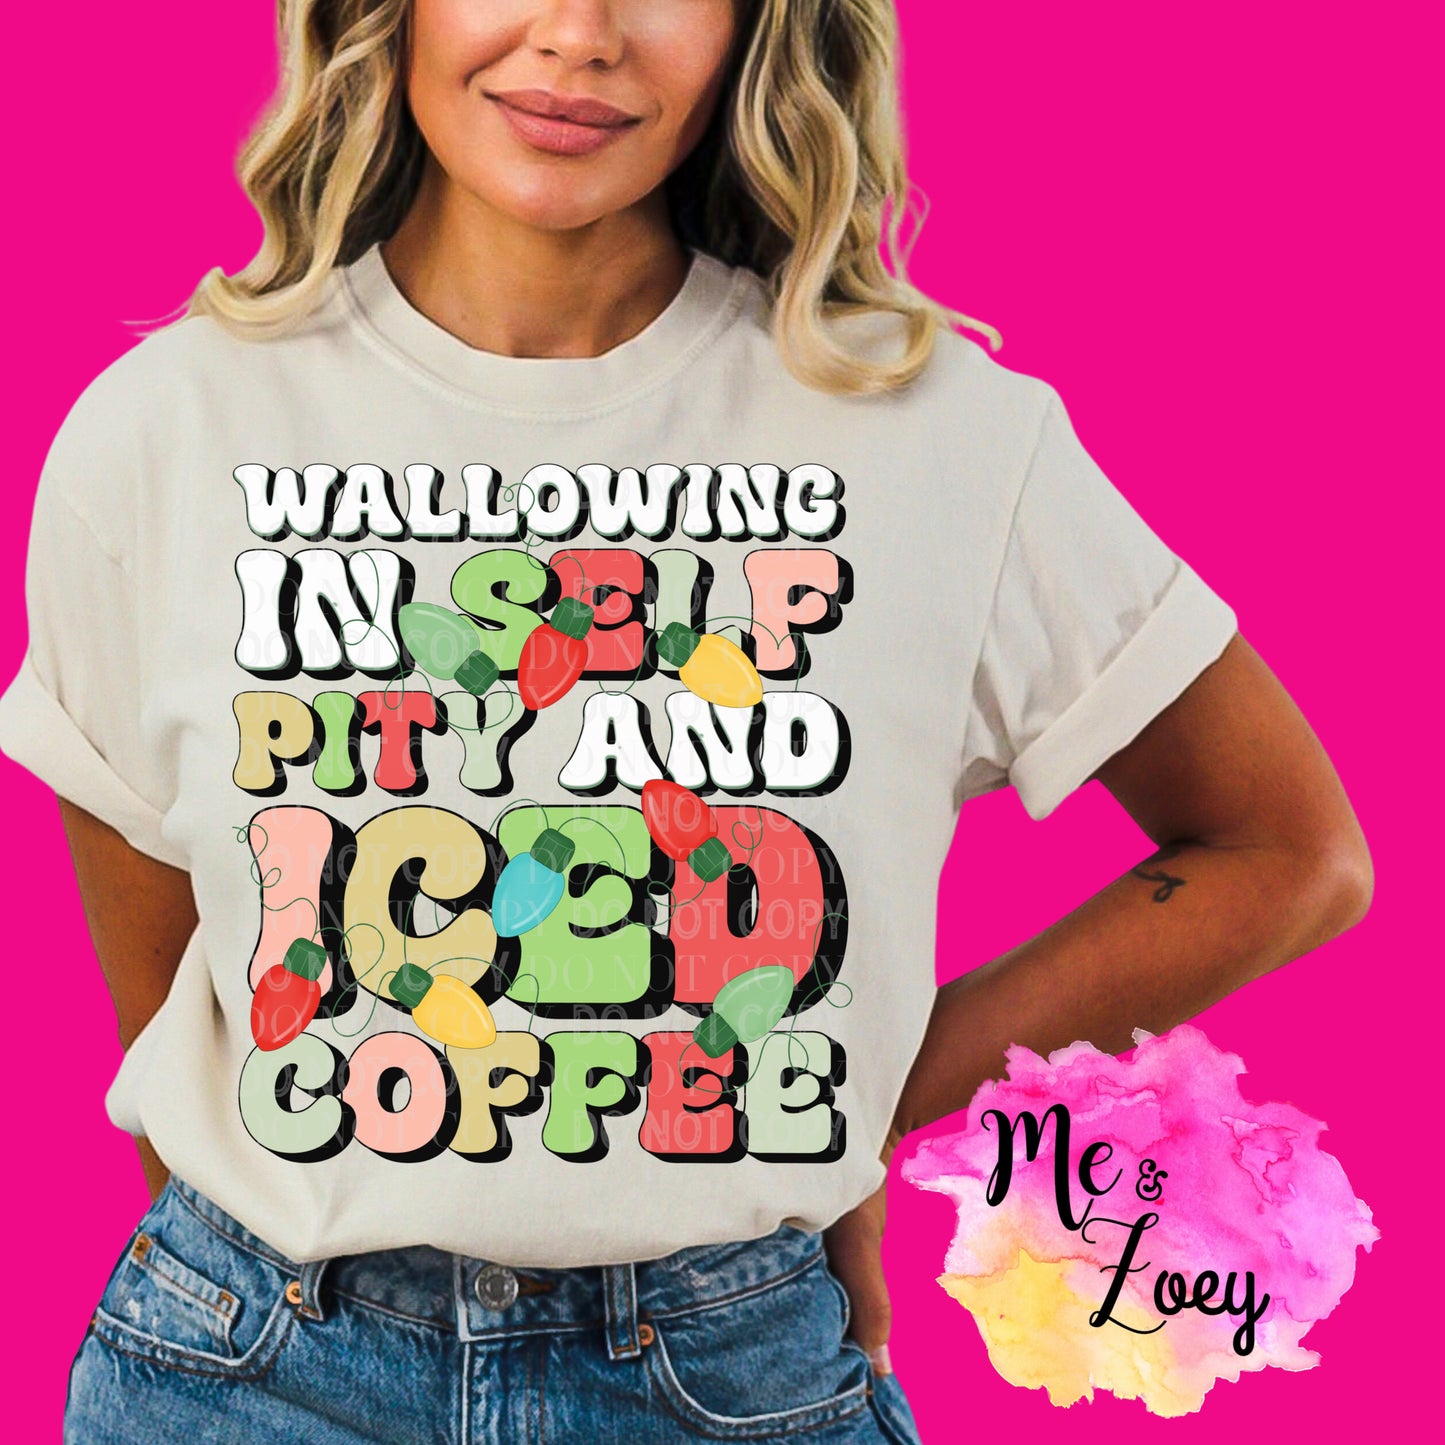 Self Pity And Iced Coffee Graphic Tee - MeAndZoey